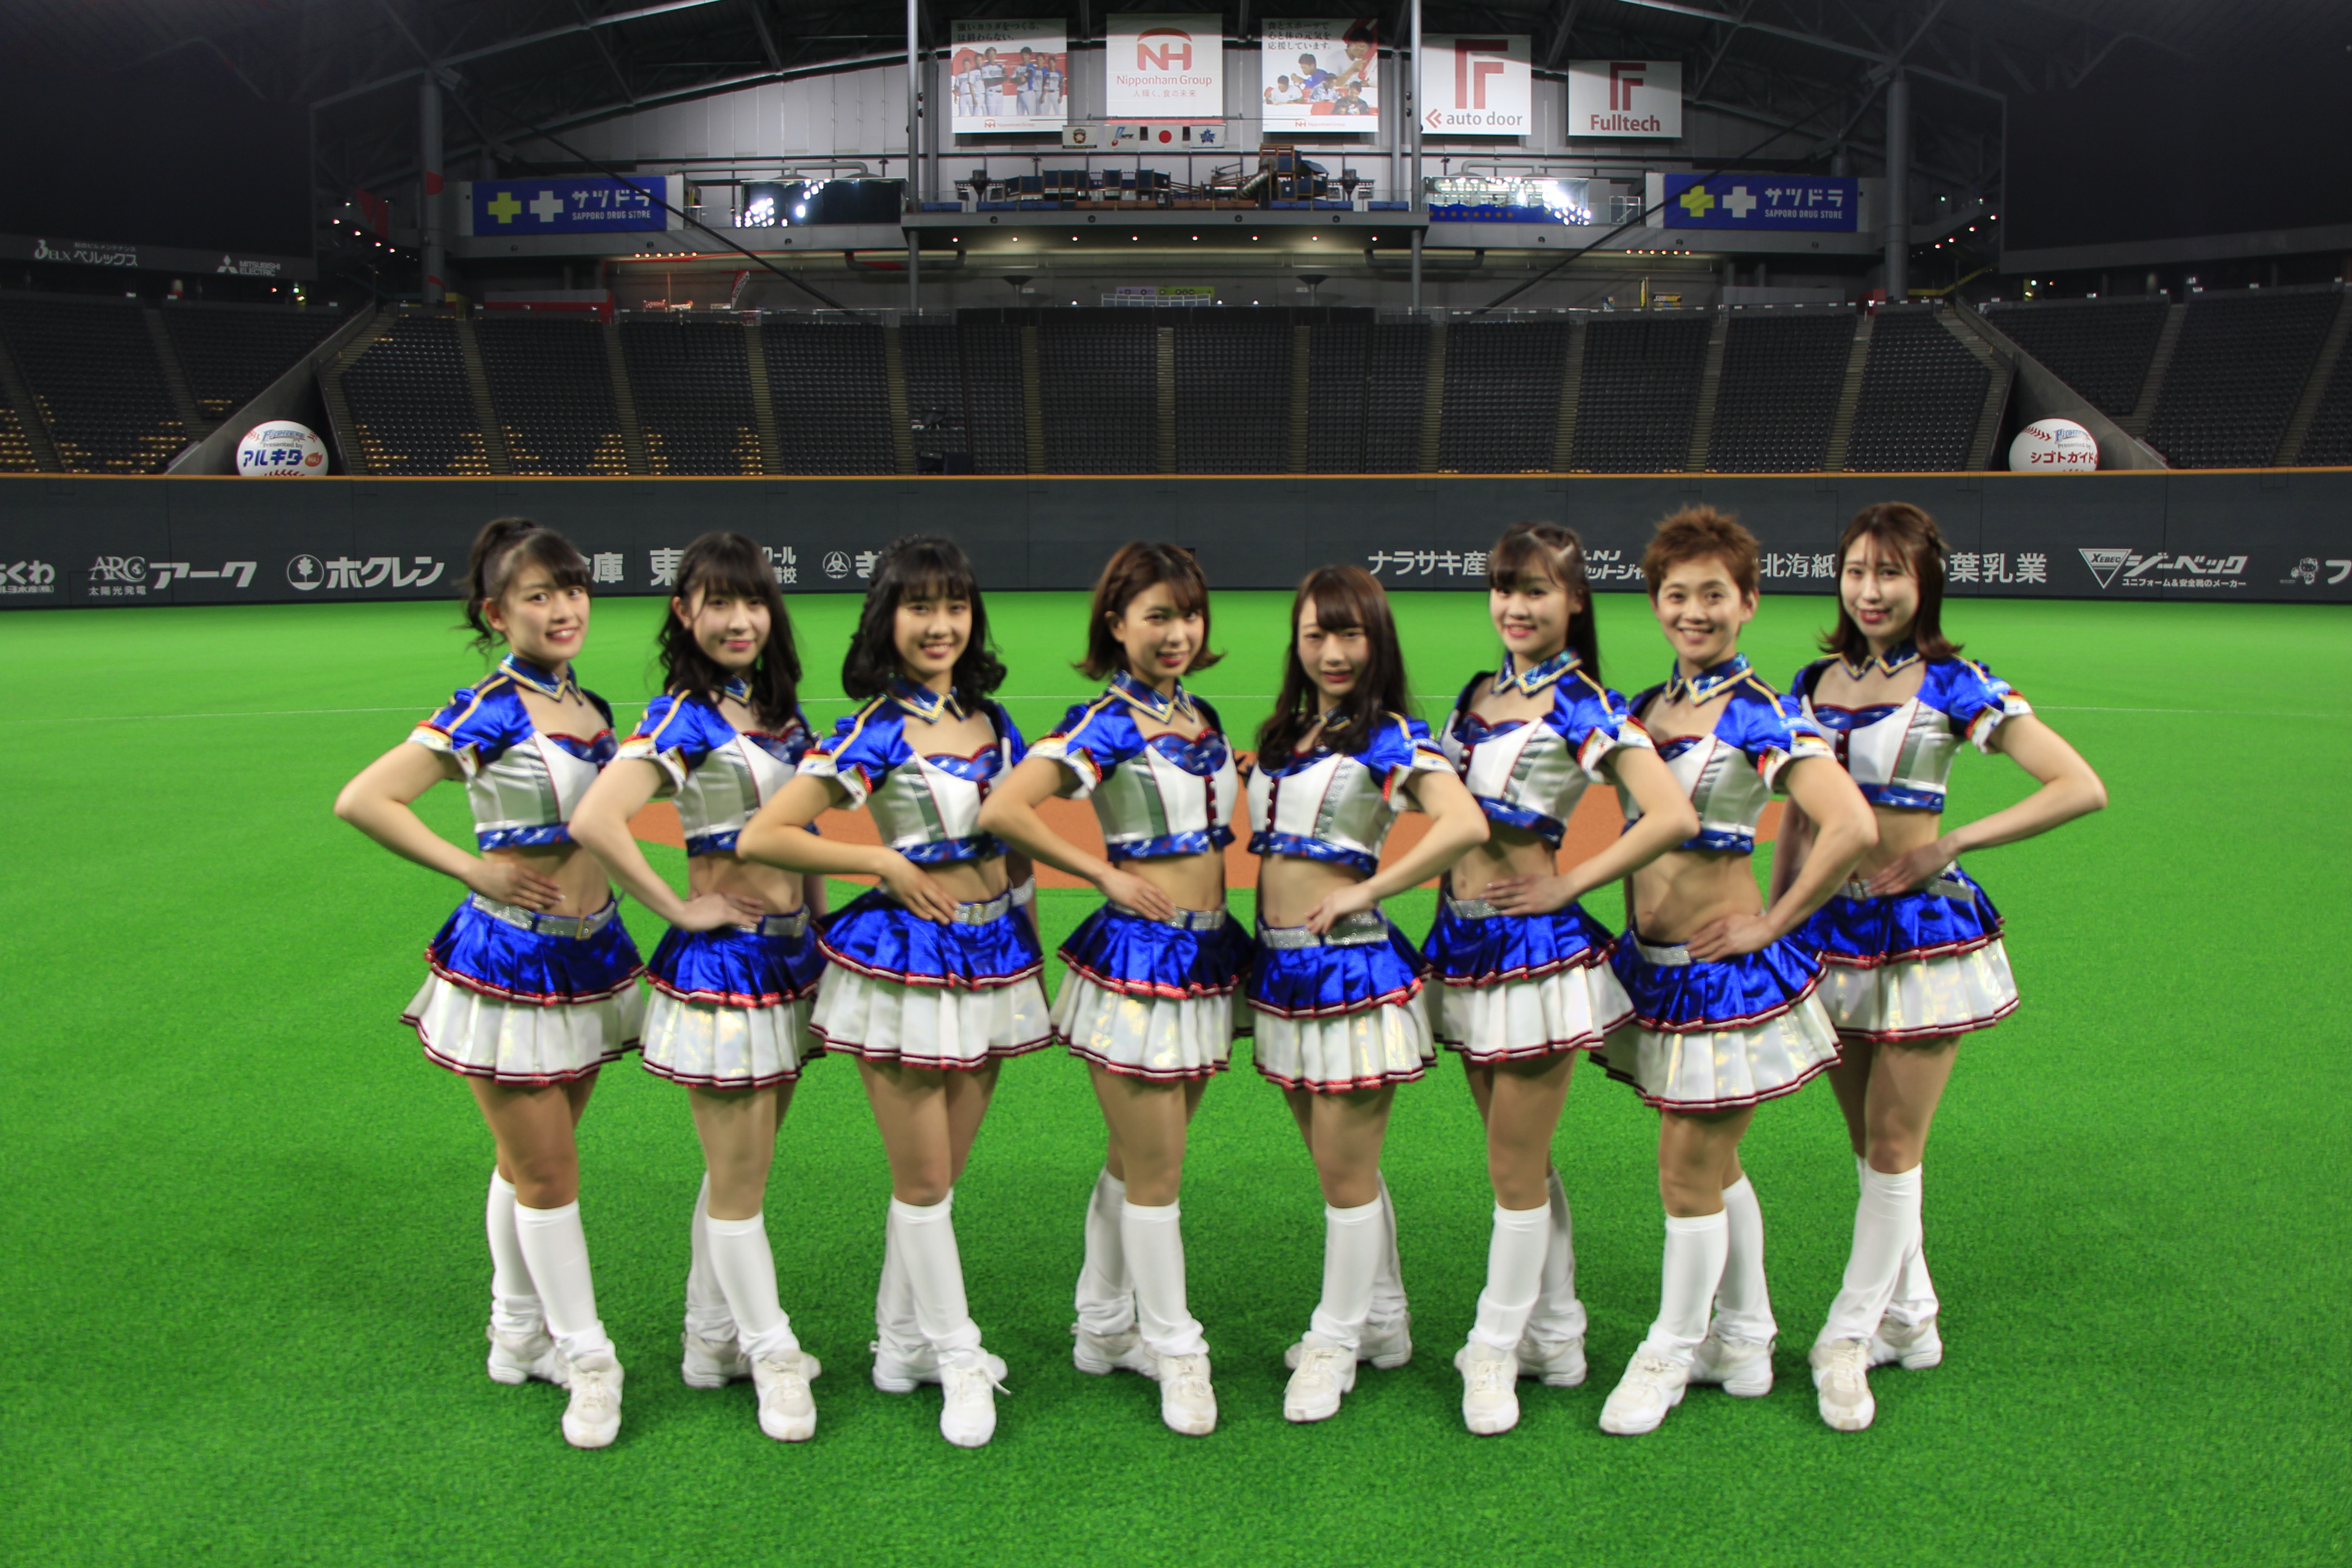 OSARECOMPANY designs and produces the costume for the Fighter Girls〜OSARECOMPANY hypes up the Hokkaido Nippon-Ham Fighters 2019 Season with new costumes!!〜